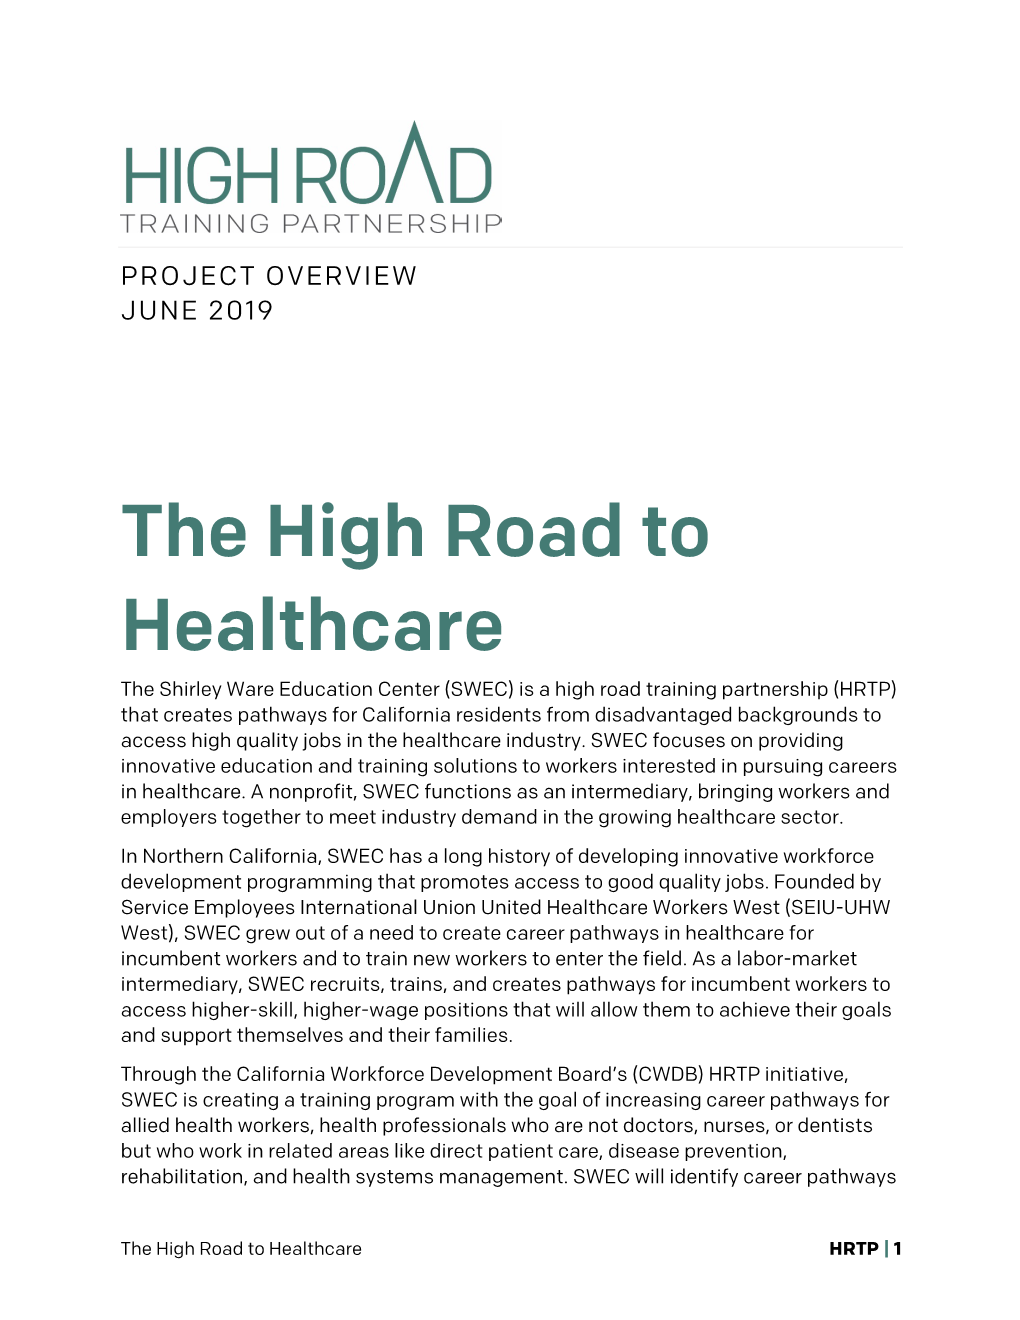 High Road to Healthcare